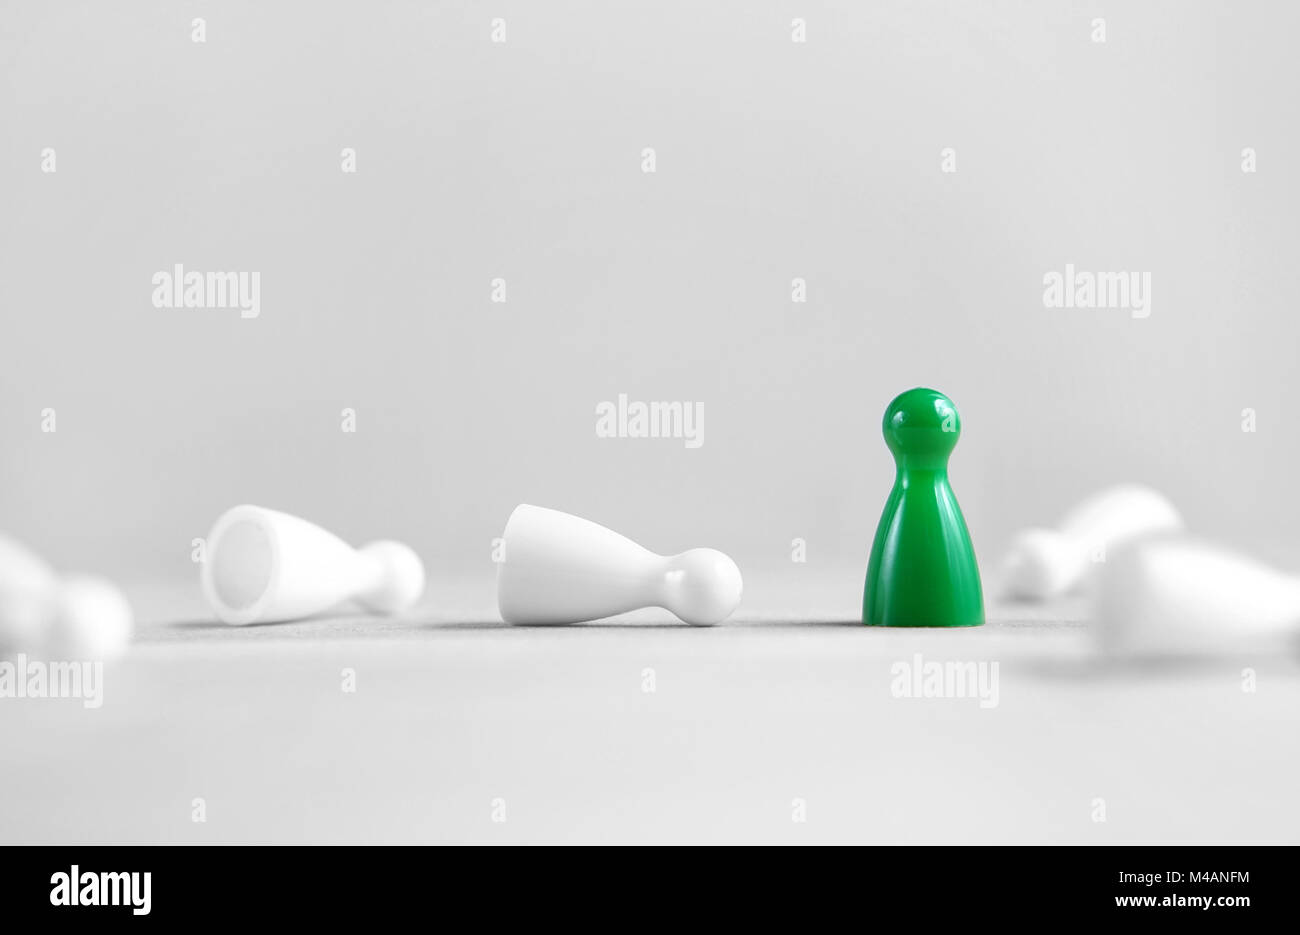 Winning, victory, success and surviving concept. Green board game pawn stand alone, the white rest fallen. Eliminating competitors. Stock Photo